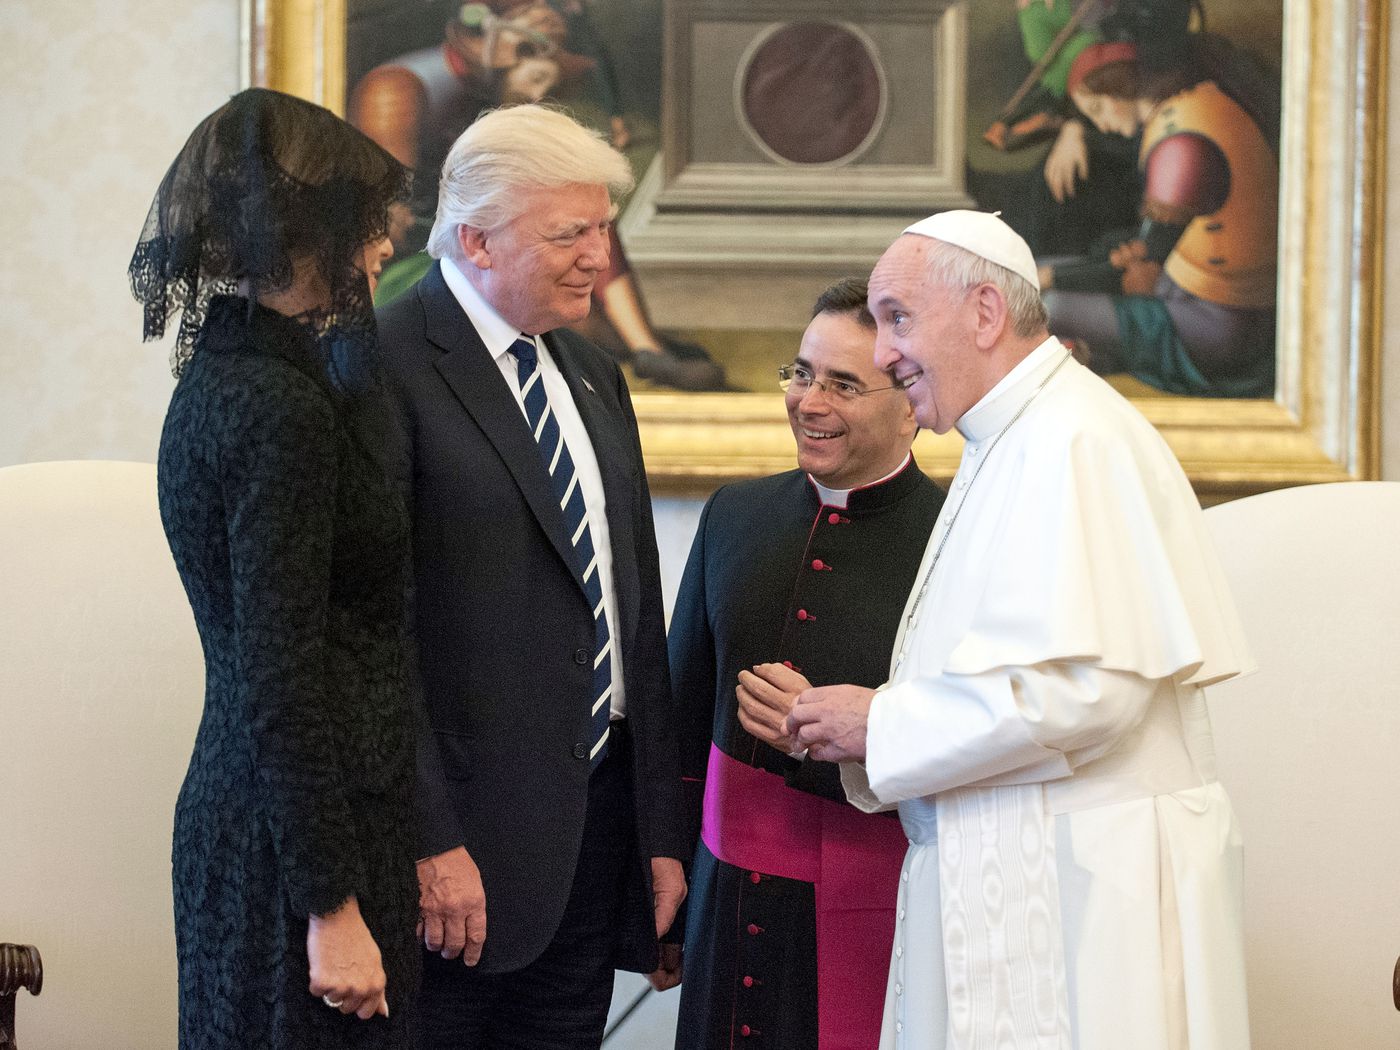 Sovereign døråbning cabriolet The Pope and Melania Share a Laugh Over Trump's Girth - Eater